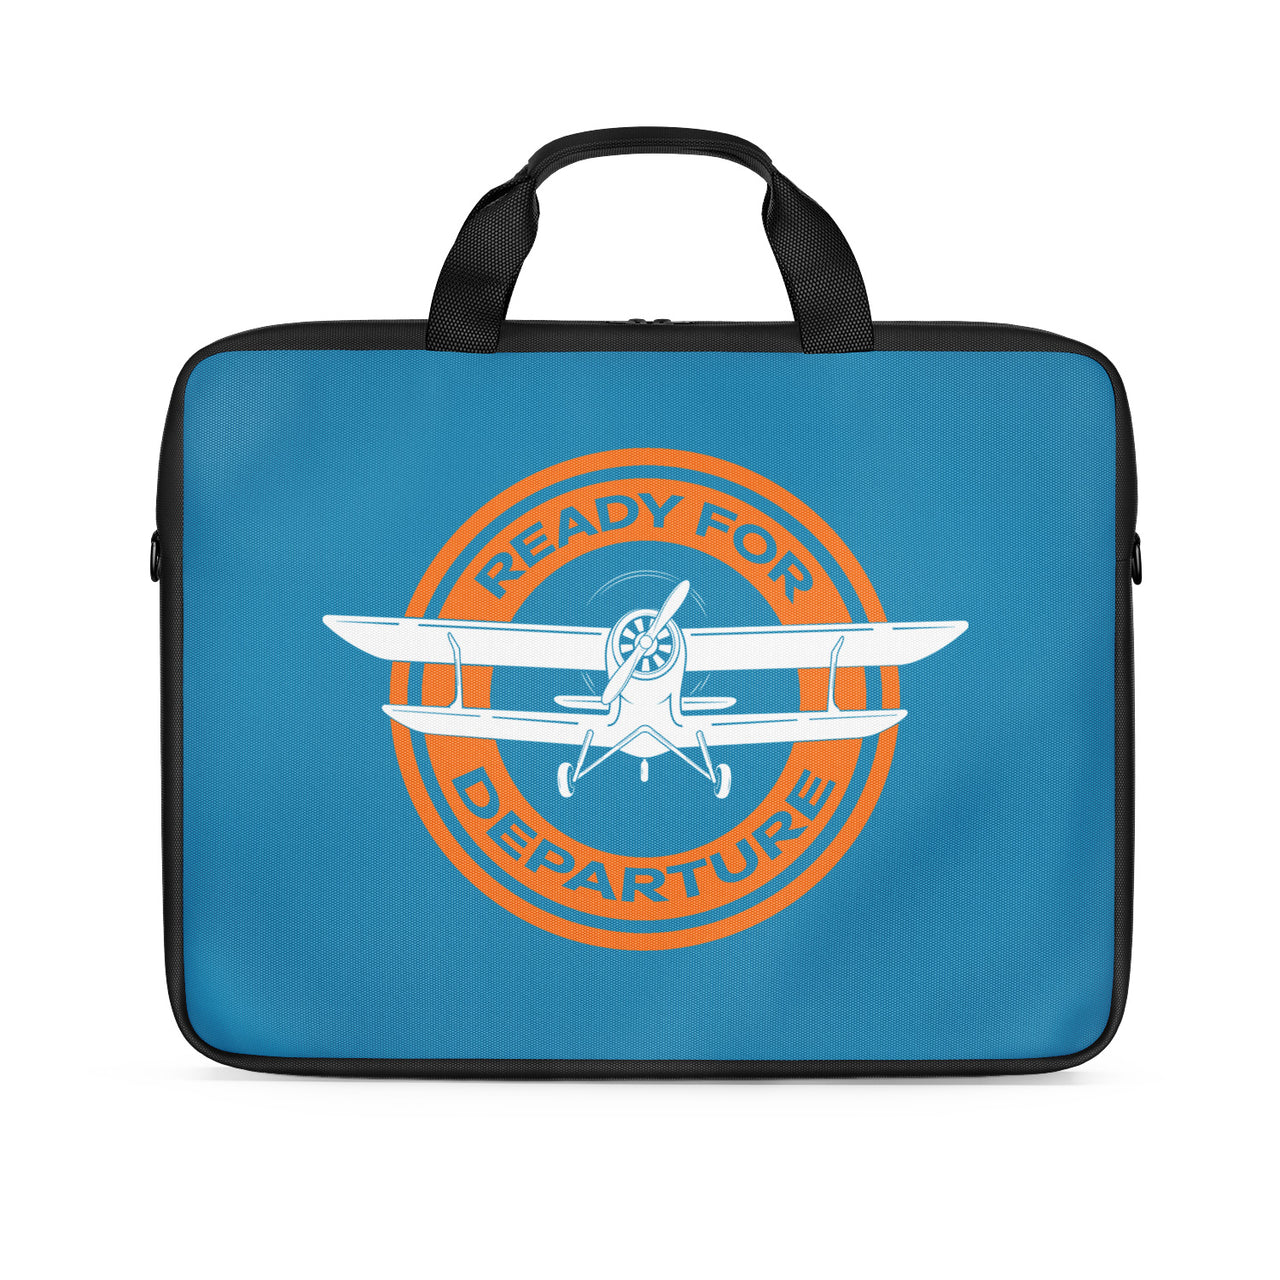 Ready for Departure Designed Laptop & Tablet Bags